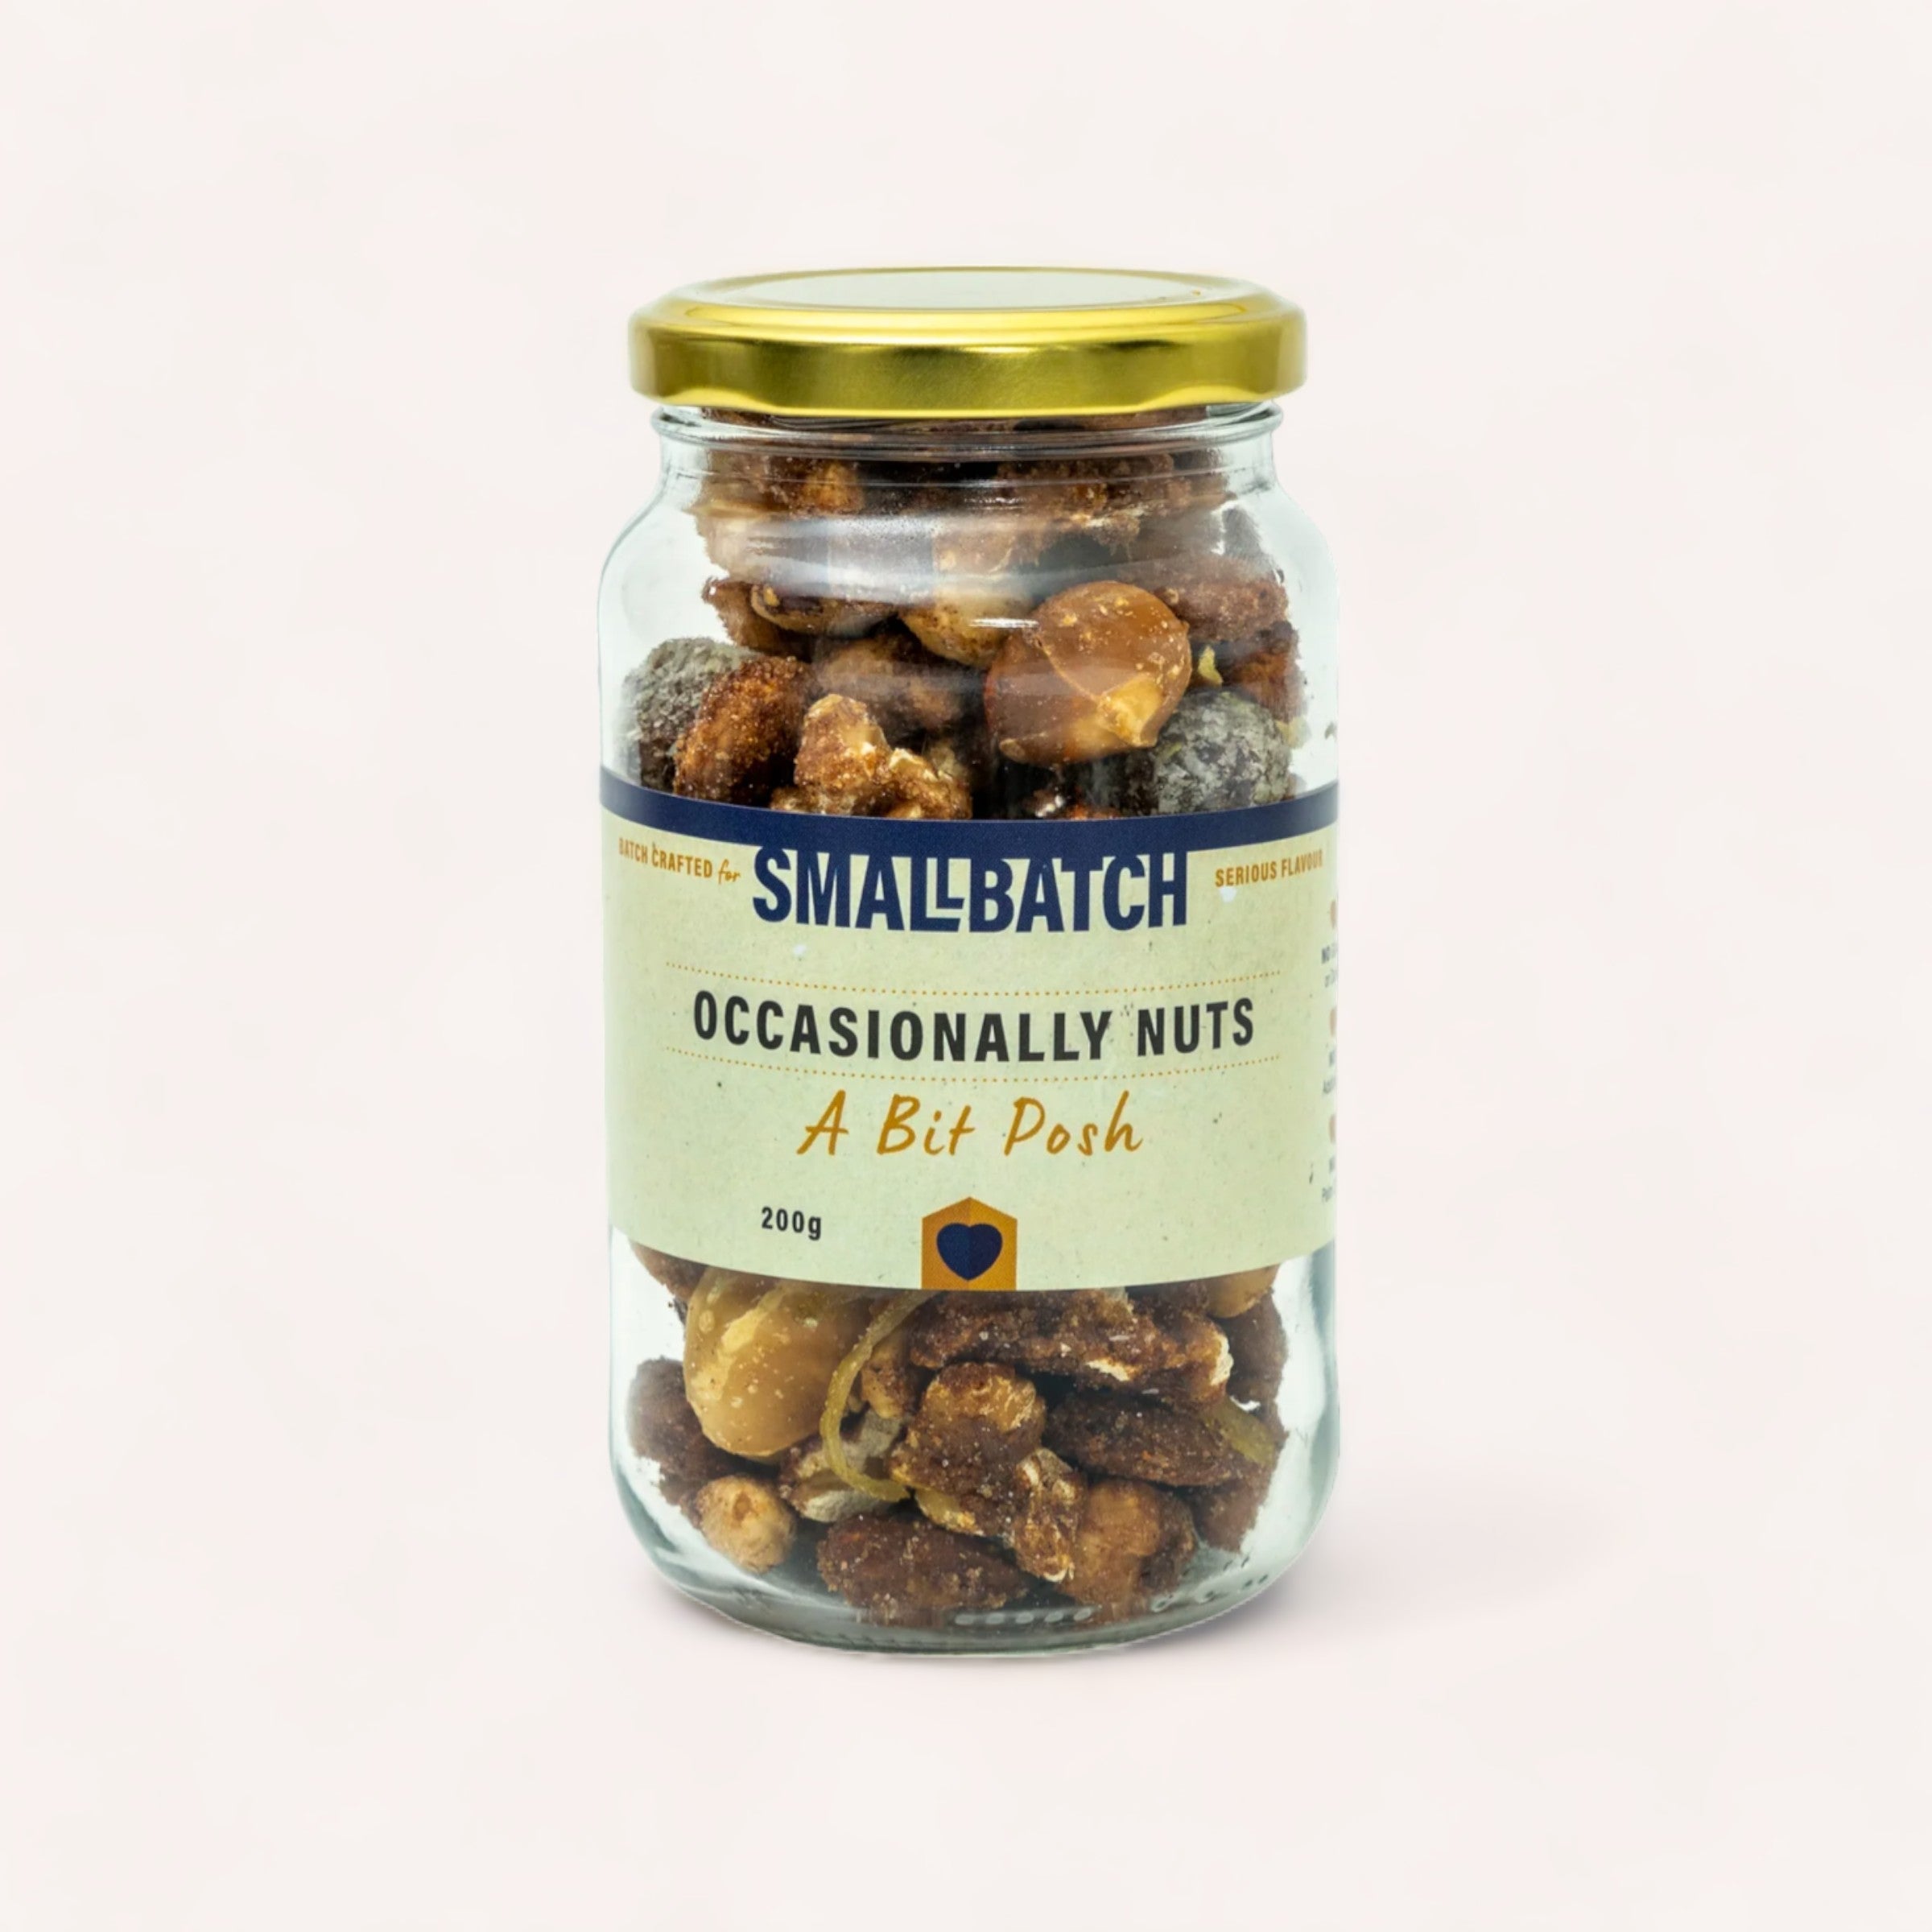 A glass jar filled with Mixed Nuts - A Bit Posh by Smallbatch, labeled "smallbatch occasionally nuts a bit posh," on a plain white background.